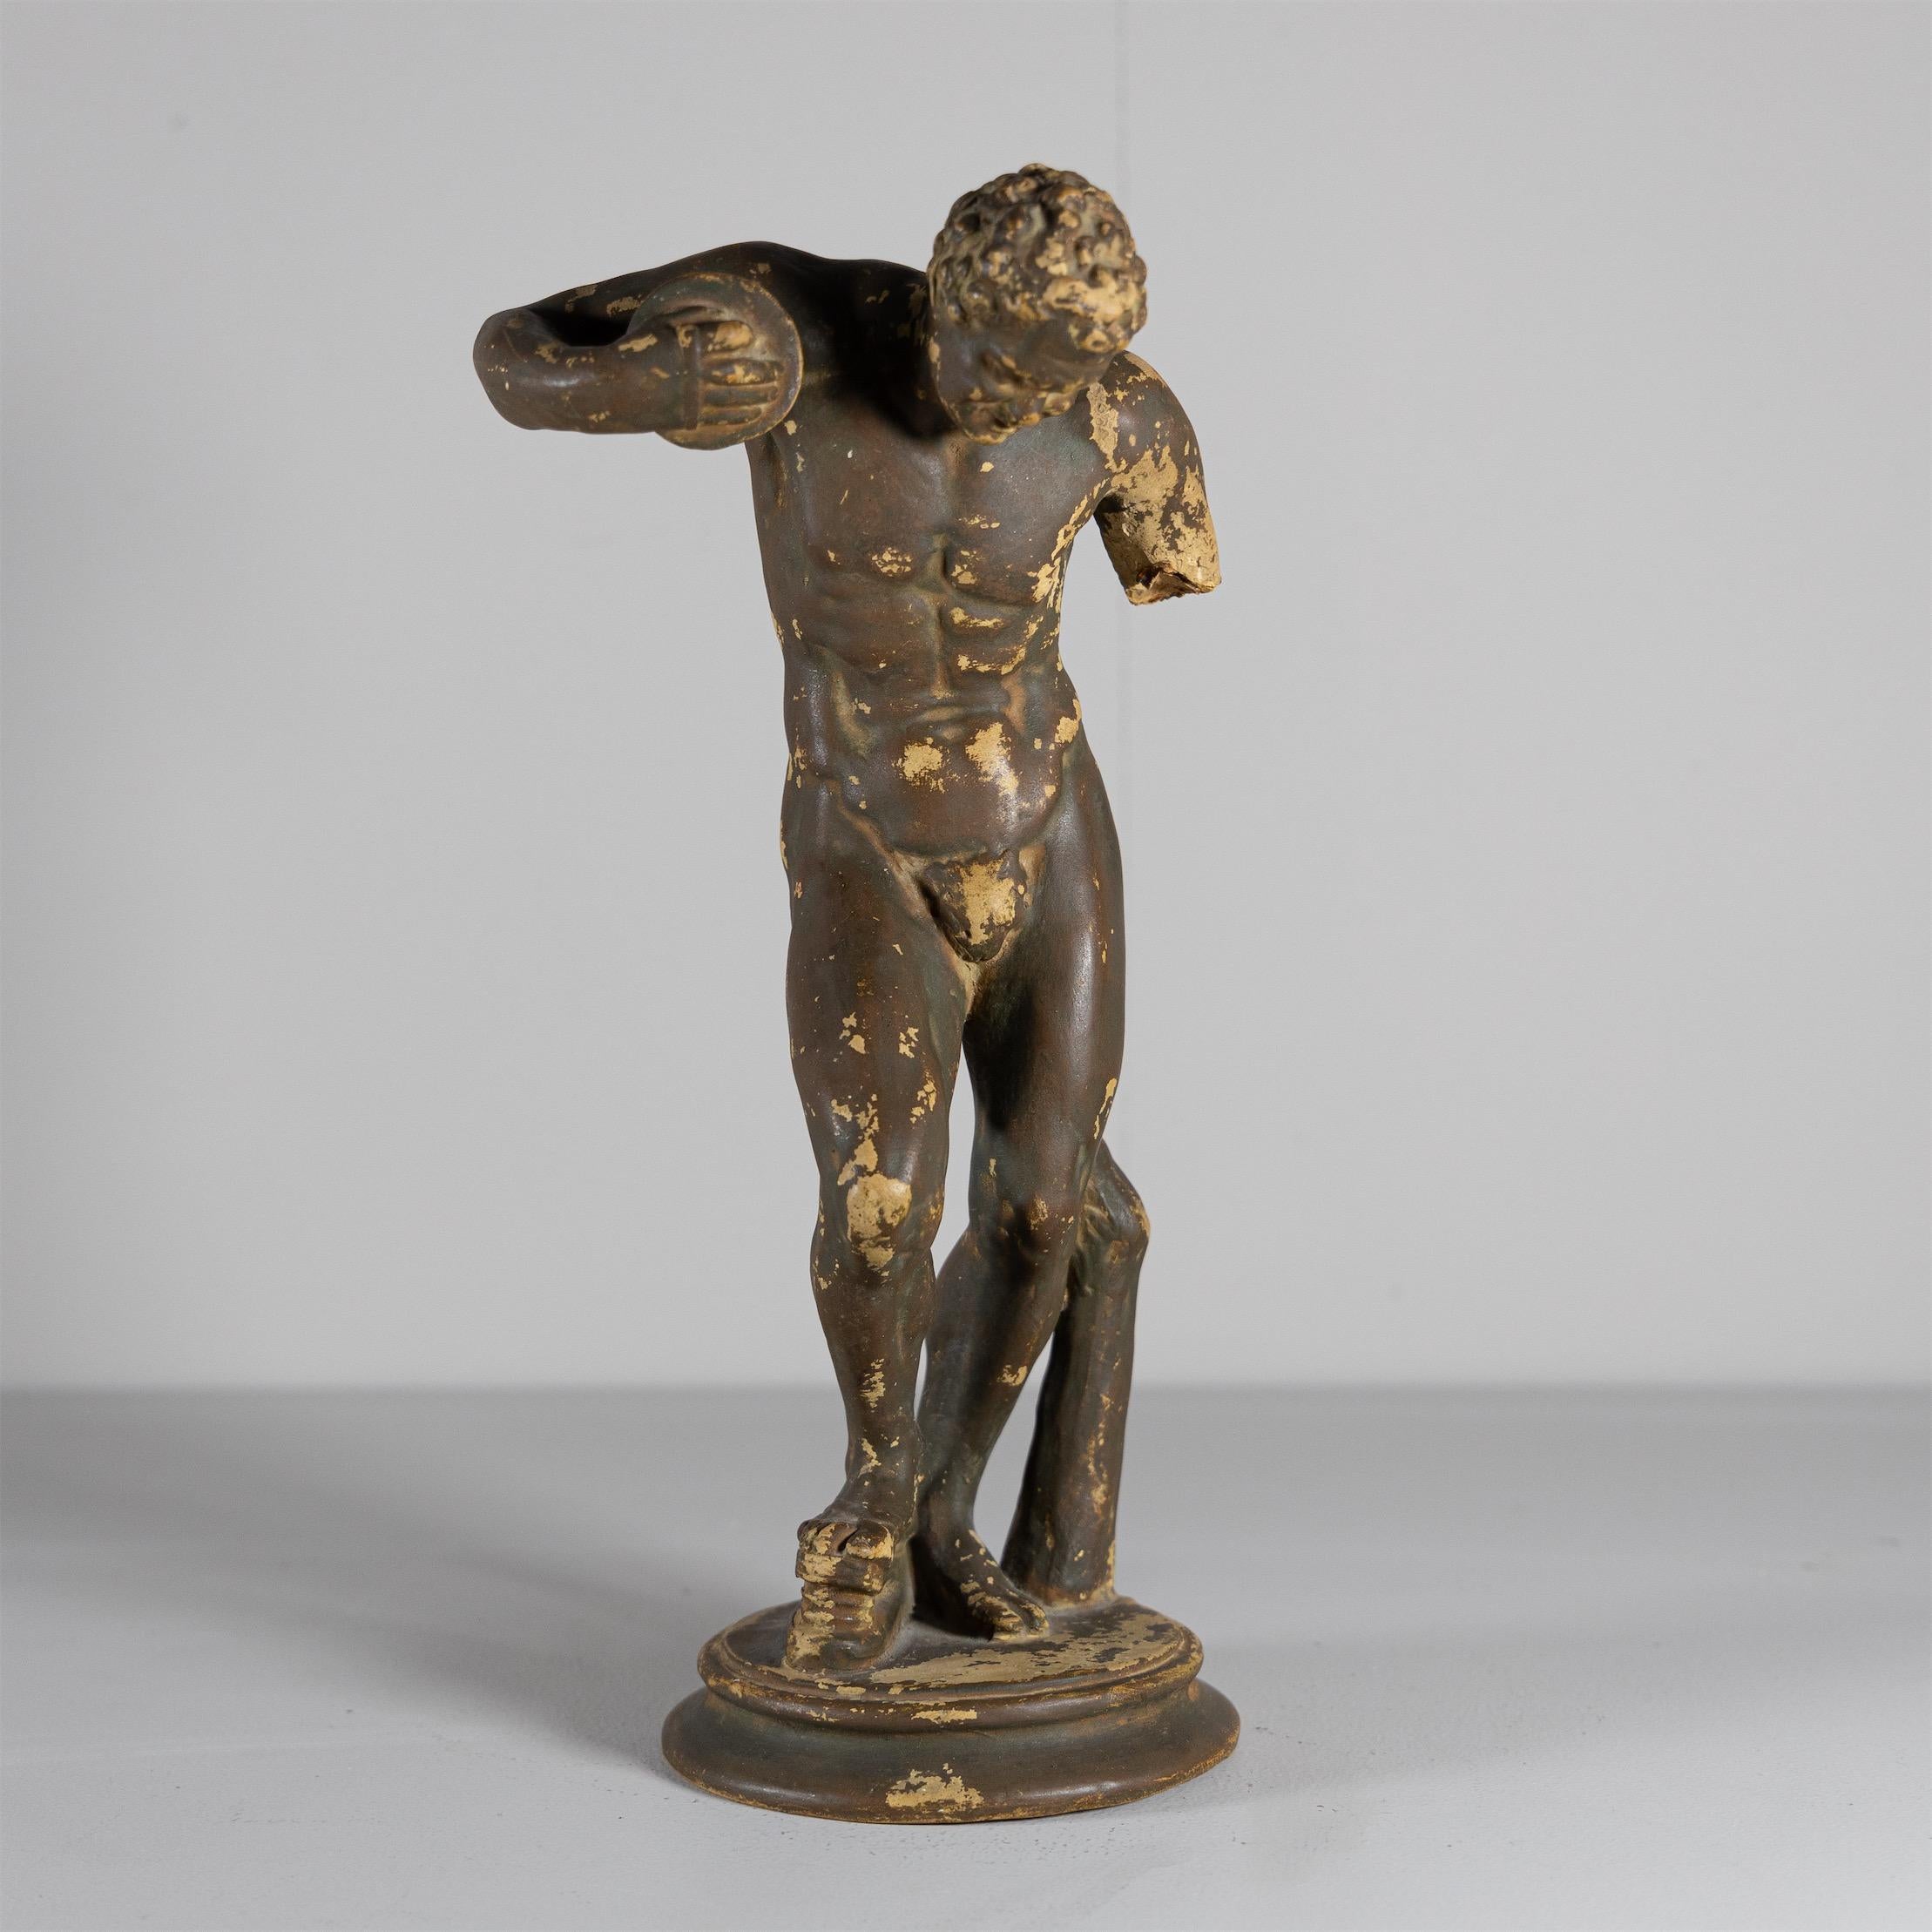 Small ceramic statue of the Dancing Faun after the original by Massimiliano Soldani-Benzi from 1695/1697.